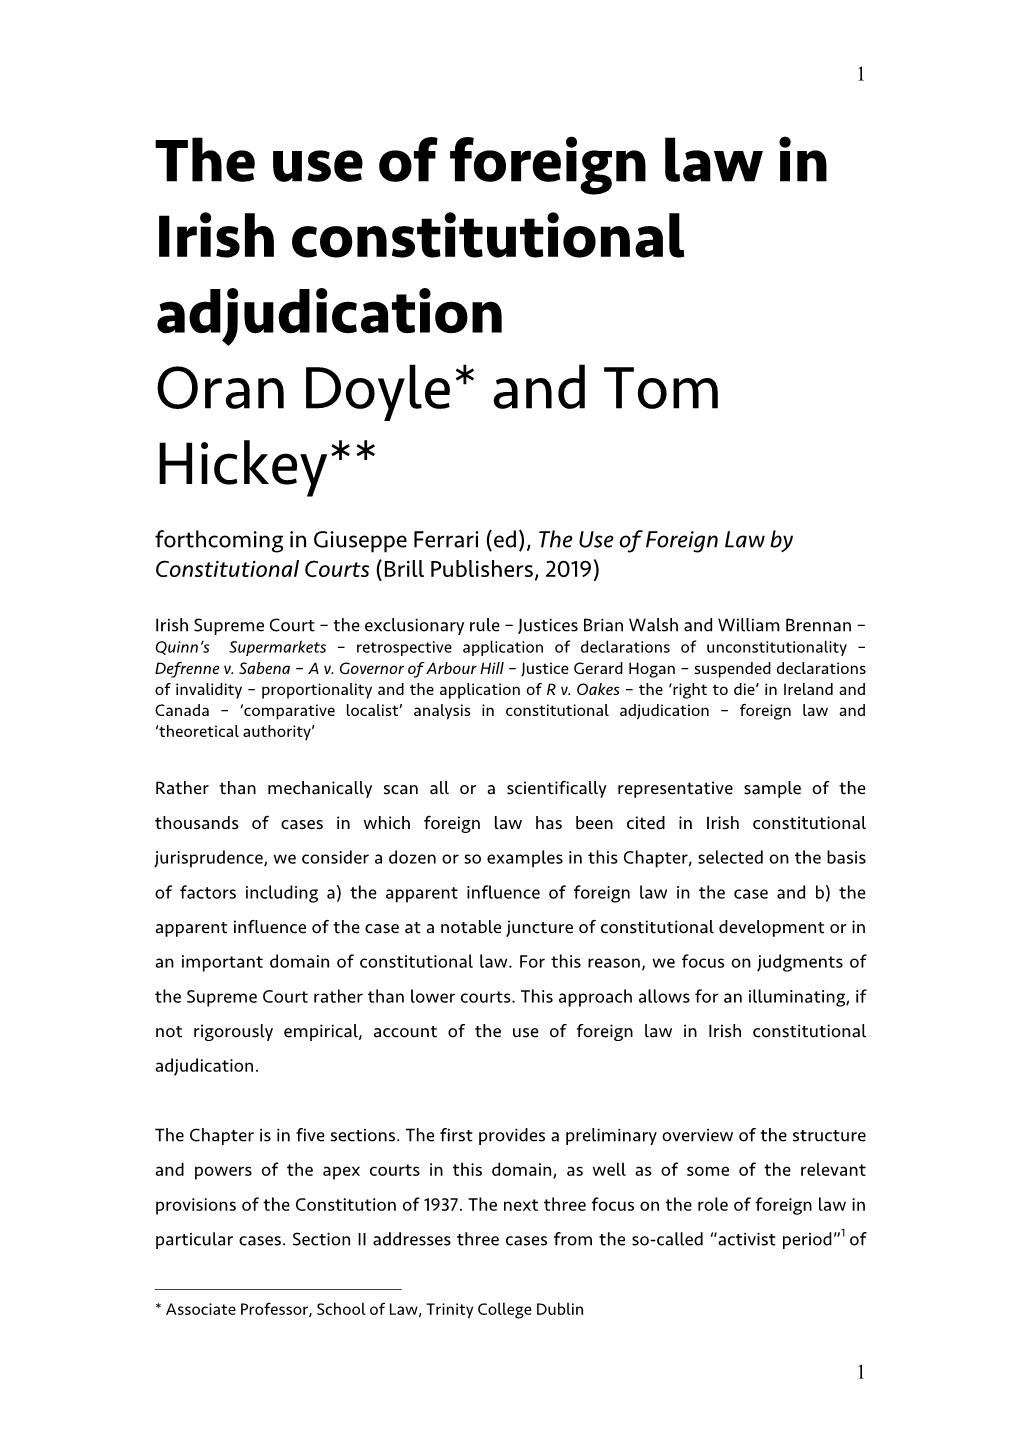 The Use of Foreign Law in Irish Constitutional Adjudication